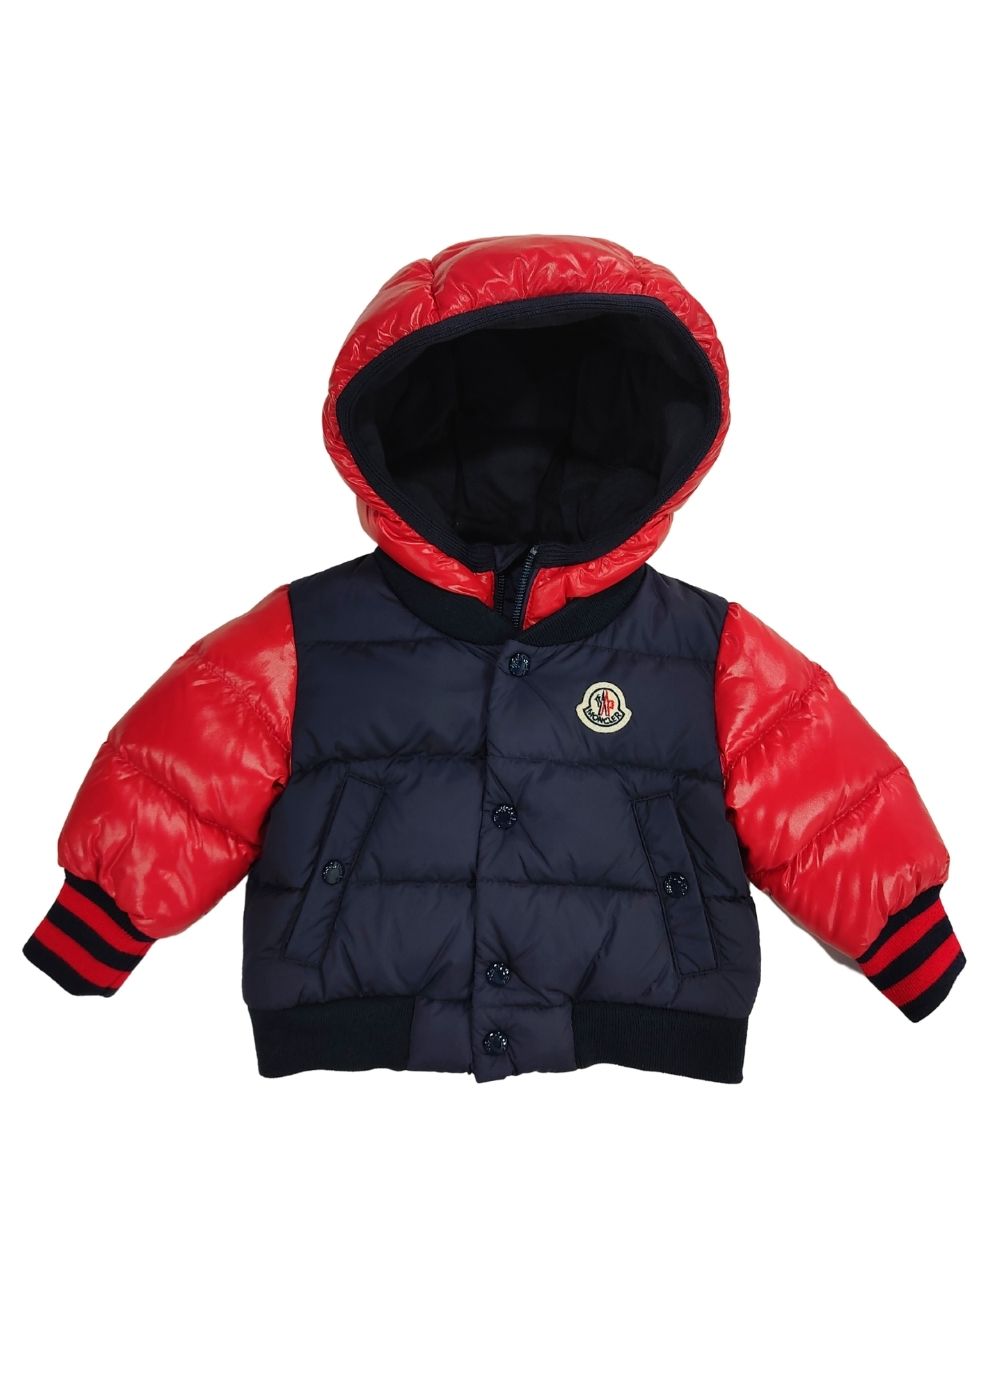 Featured image for “MONCLER PIUMINO ROSSO-BLU”